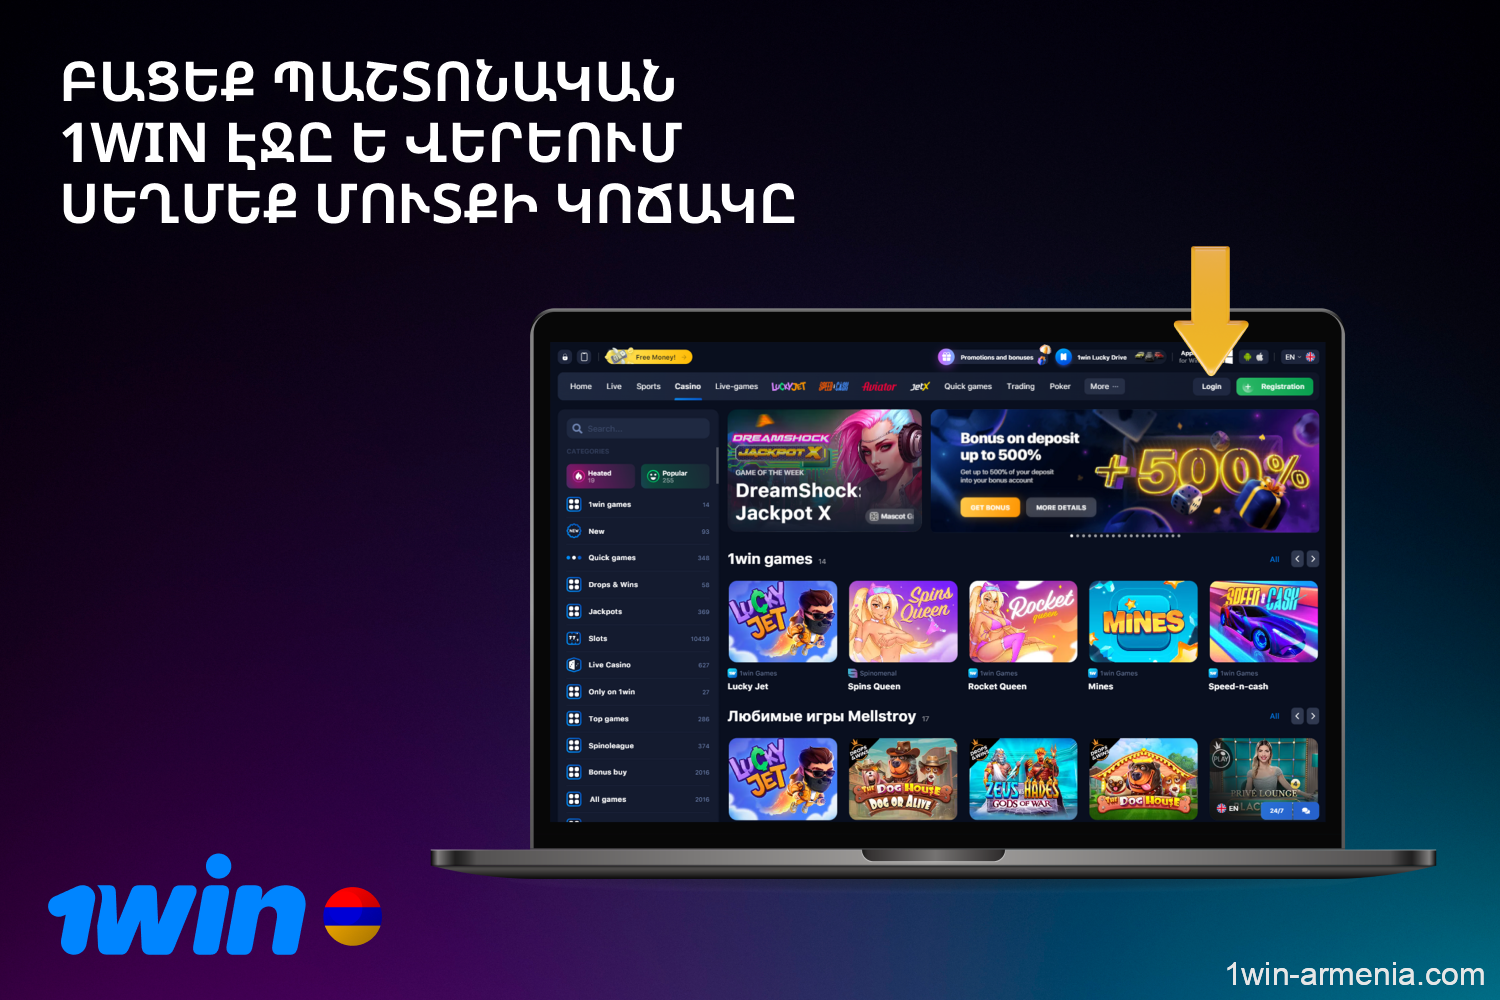 To access 1win, users from Armenia must first visit the official page